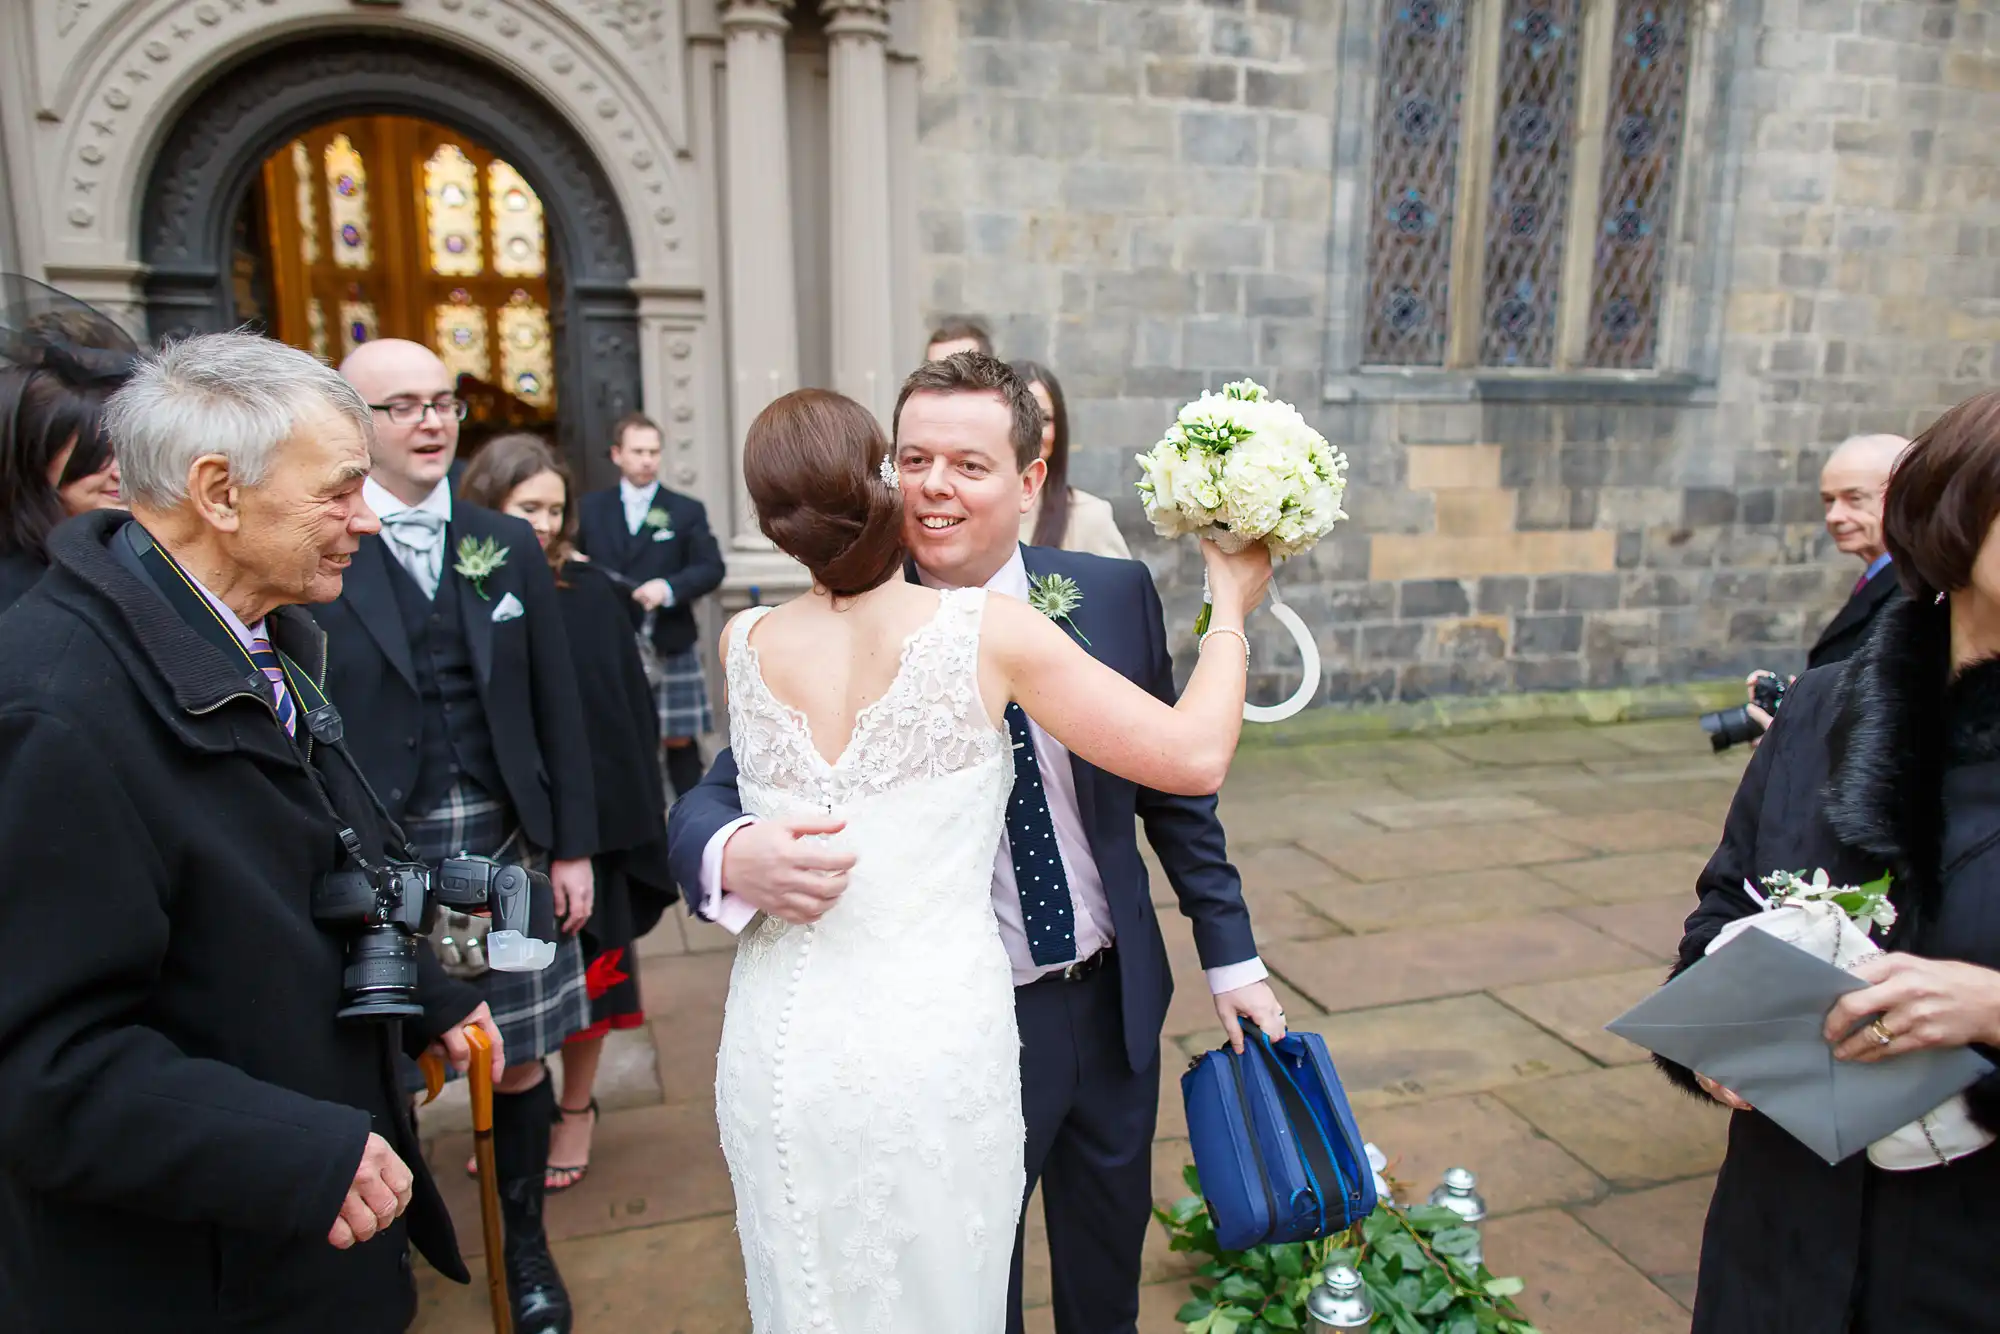 Bride and groom hug outside a church, surrounded by guests, with a photographer capturing the moment.